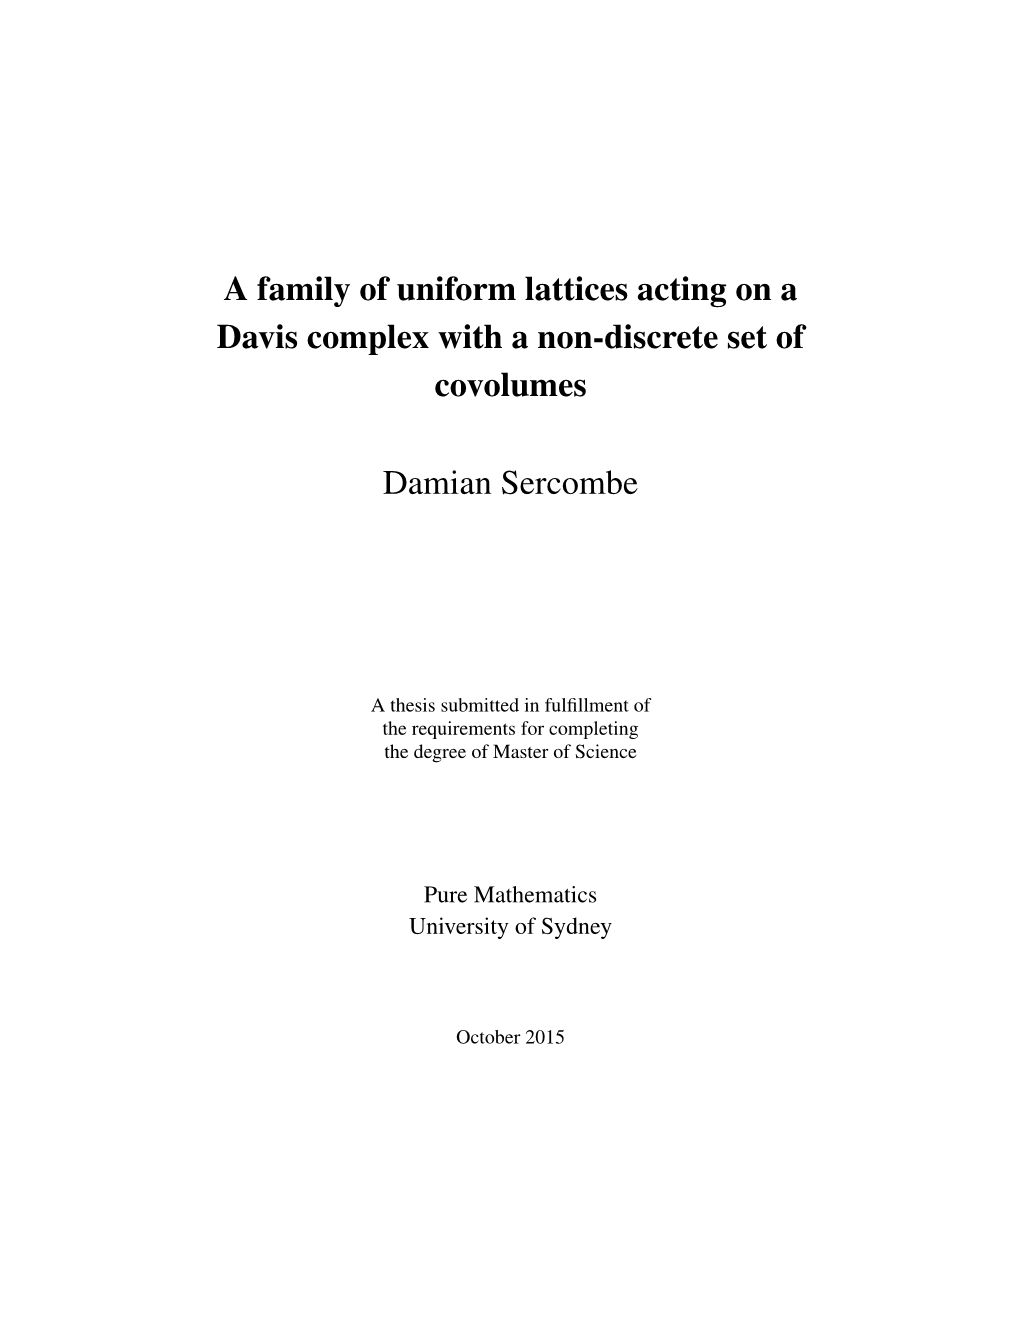 A Family of Uniform Lattices Acting on a Davis Complex with a Non-Discrete Set of Covolumes